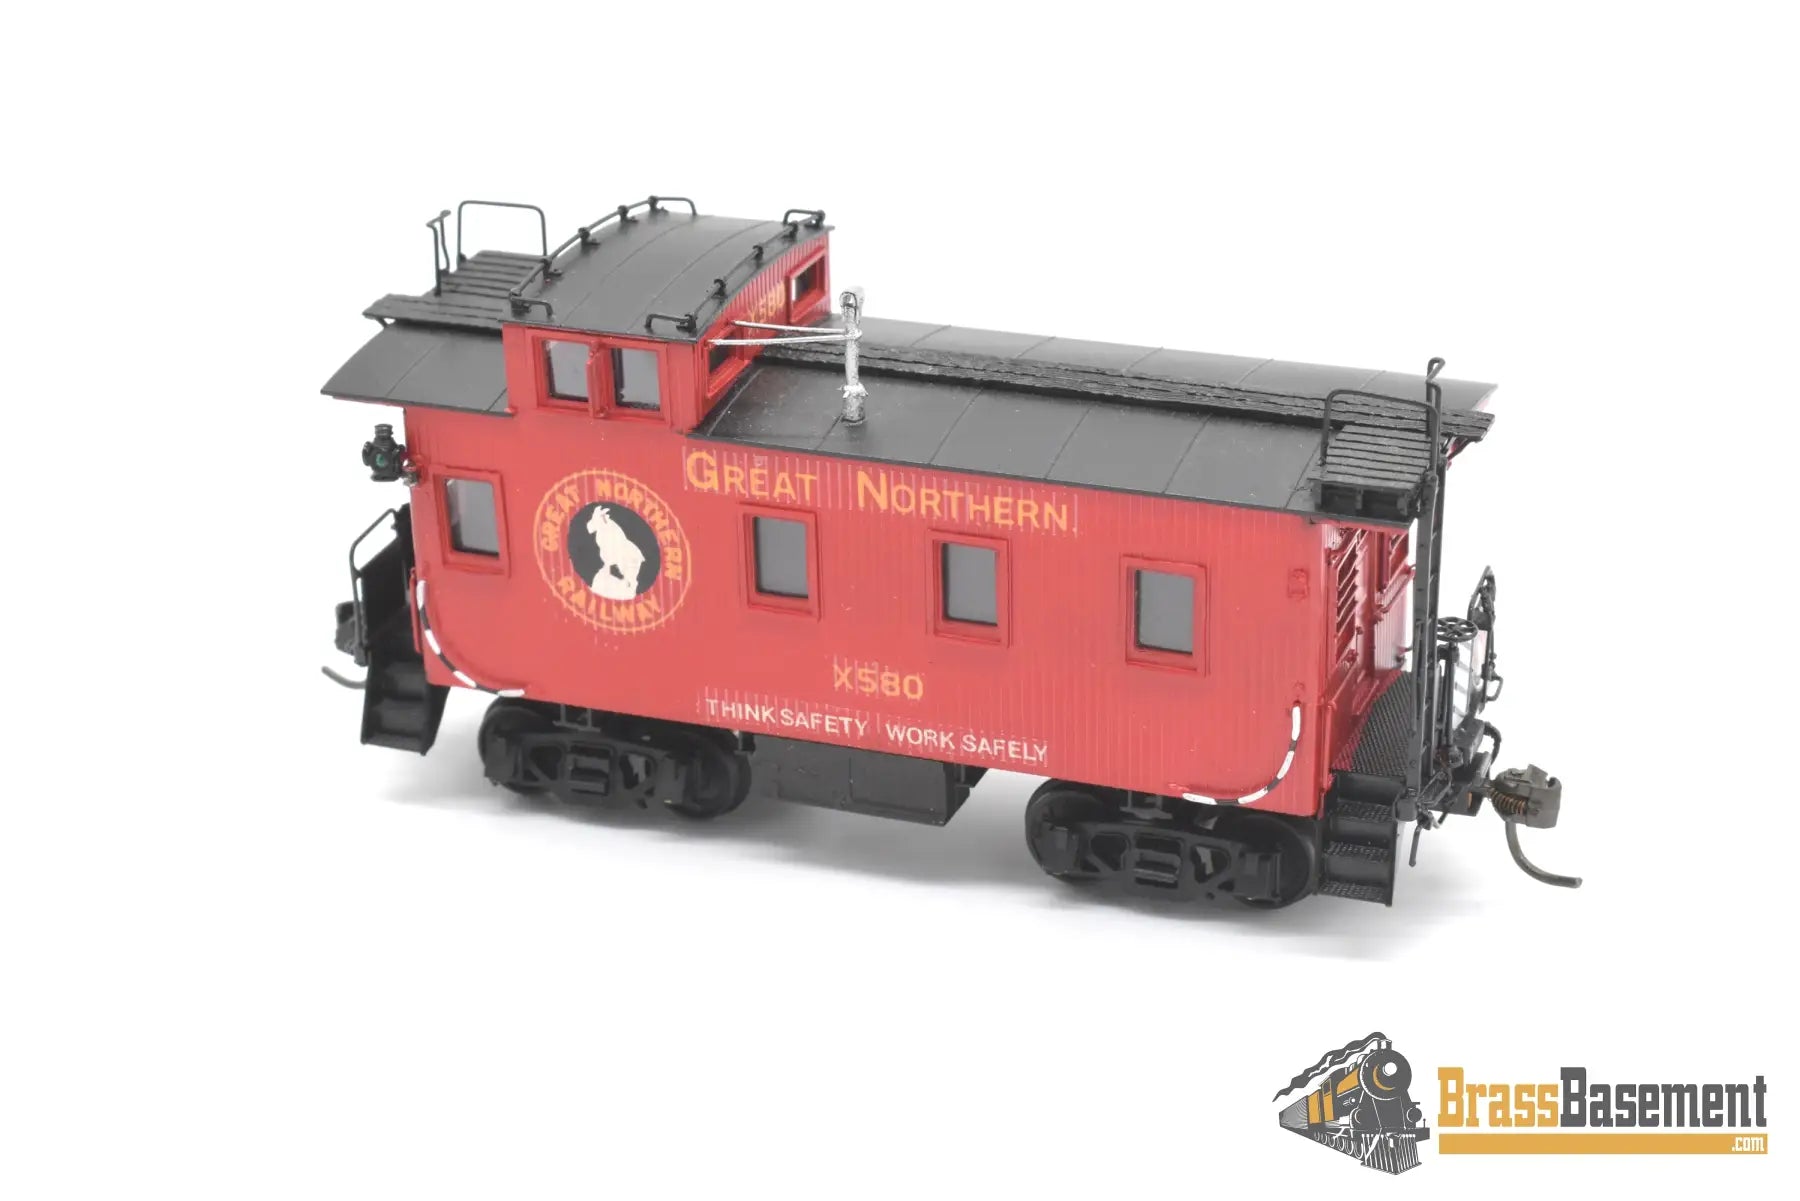 Ho Brass - Beaver Creek Great Northern Gn Wood Caboose X580 Extended Windows F/P